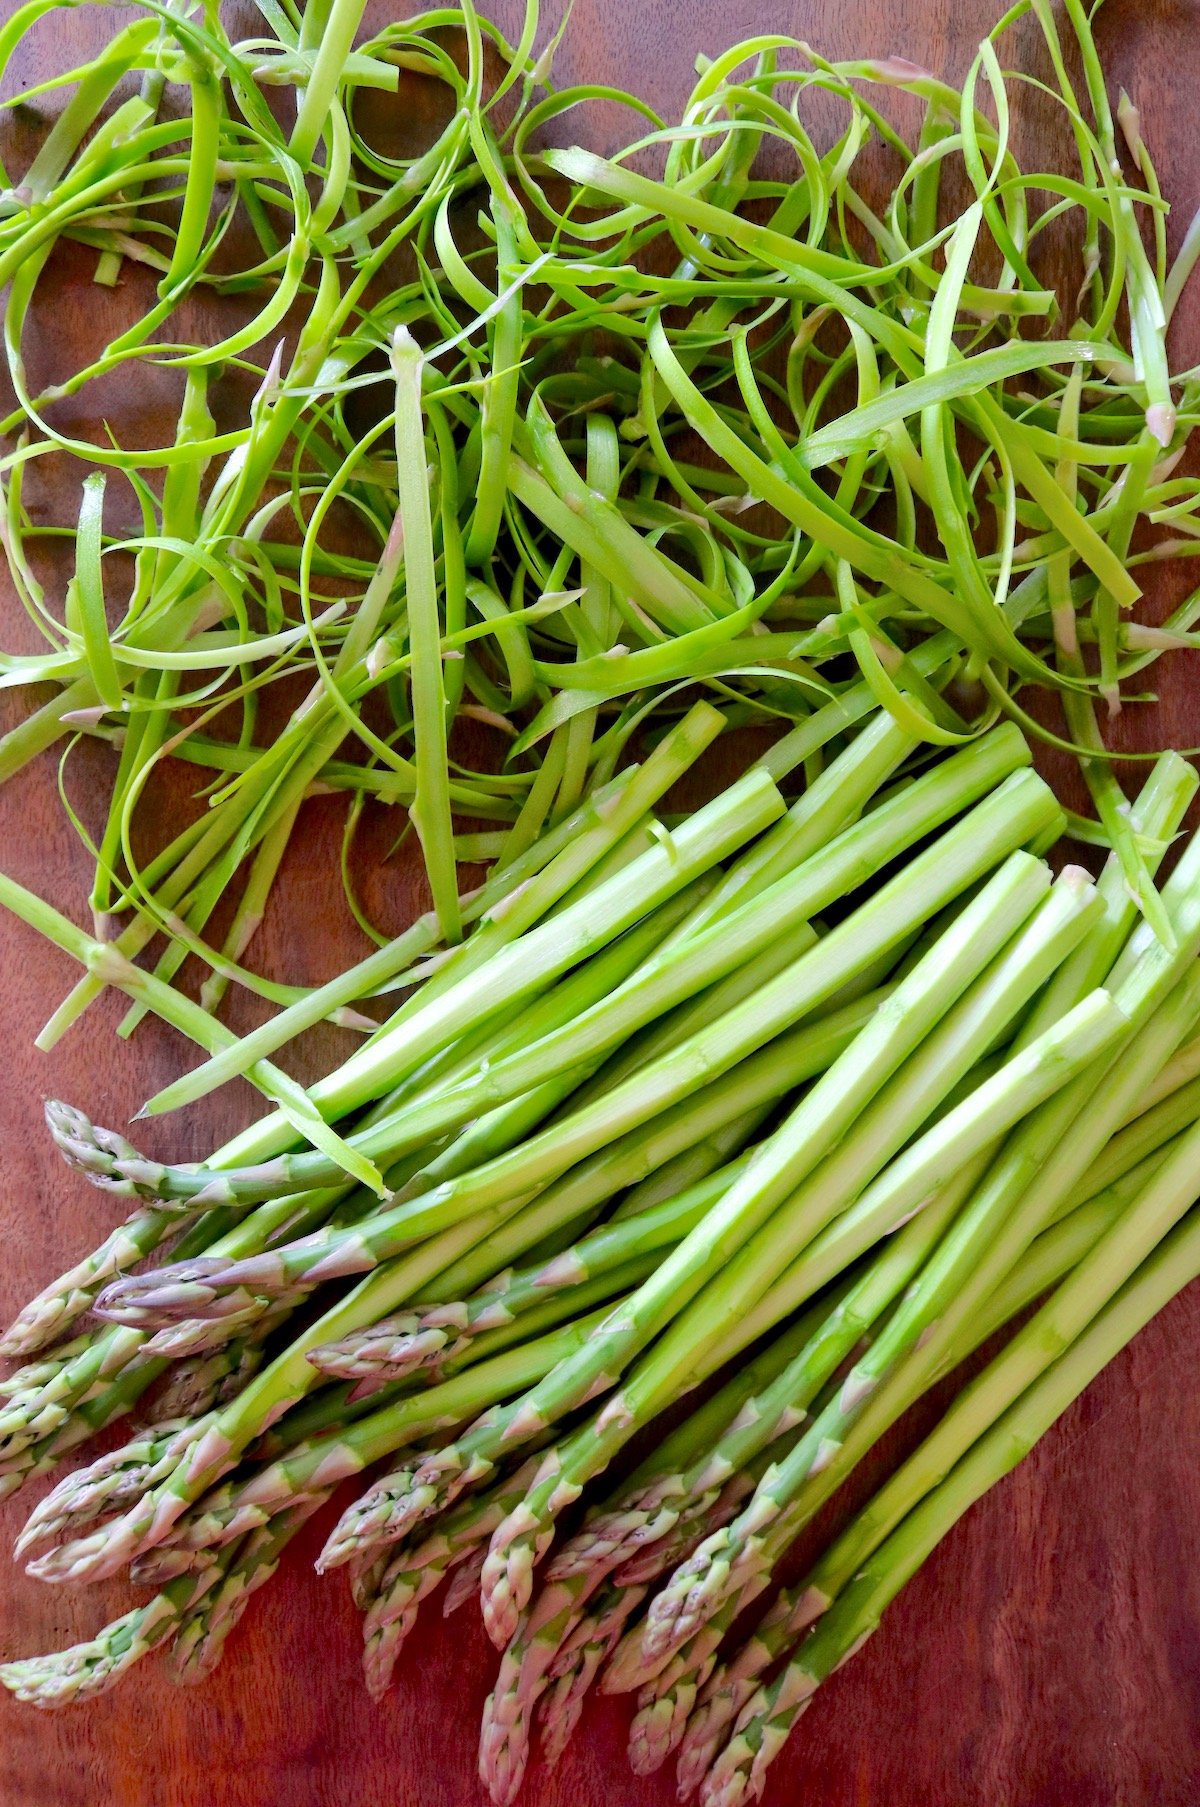 many peeled asparagus spears with peels next to them